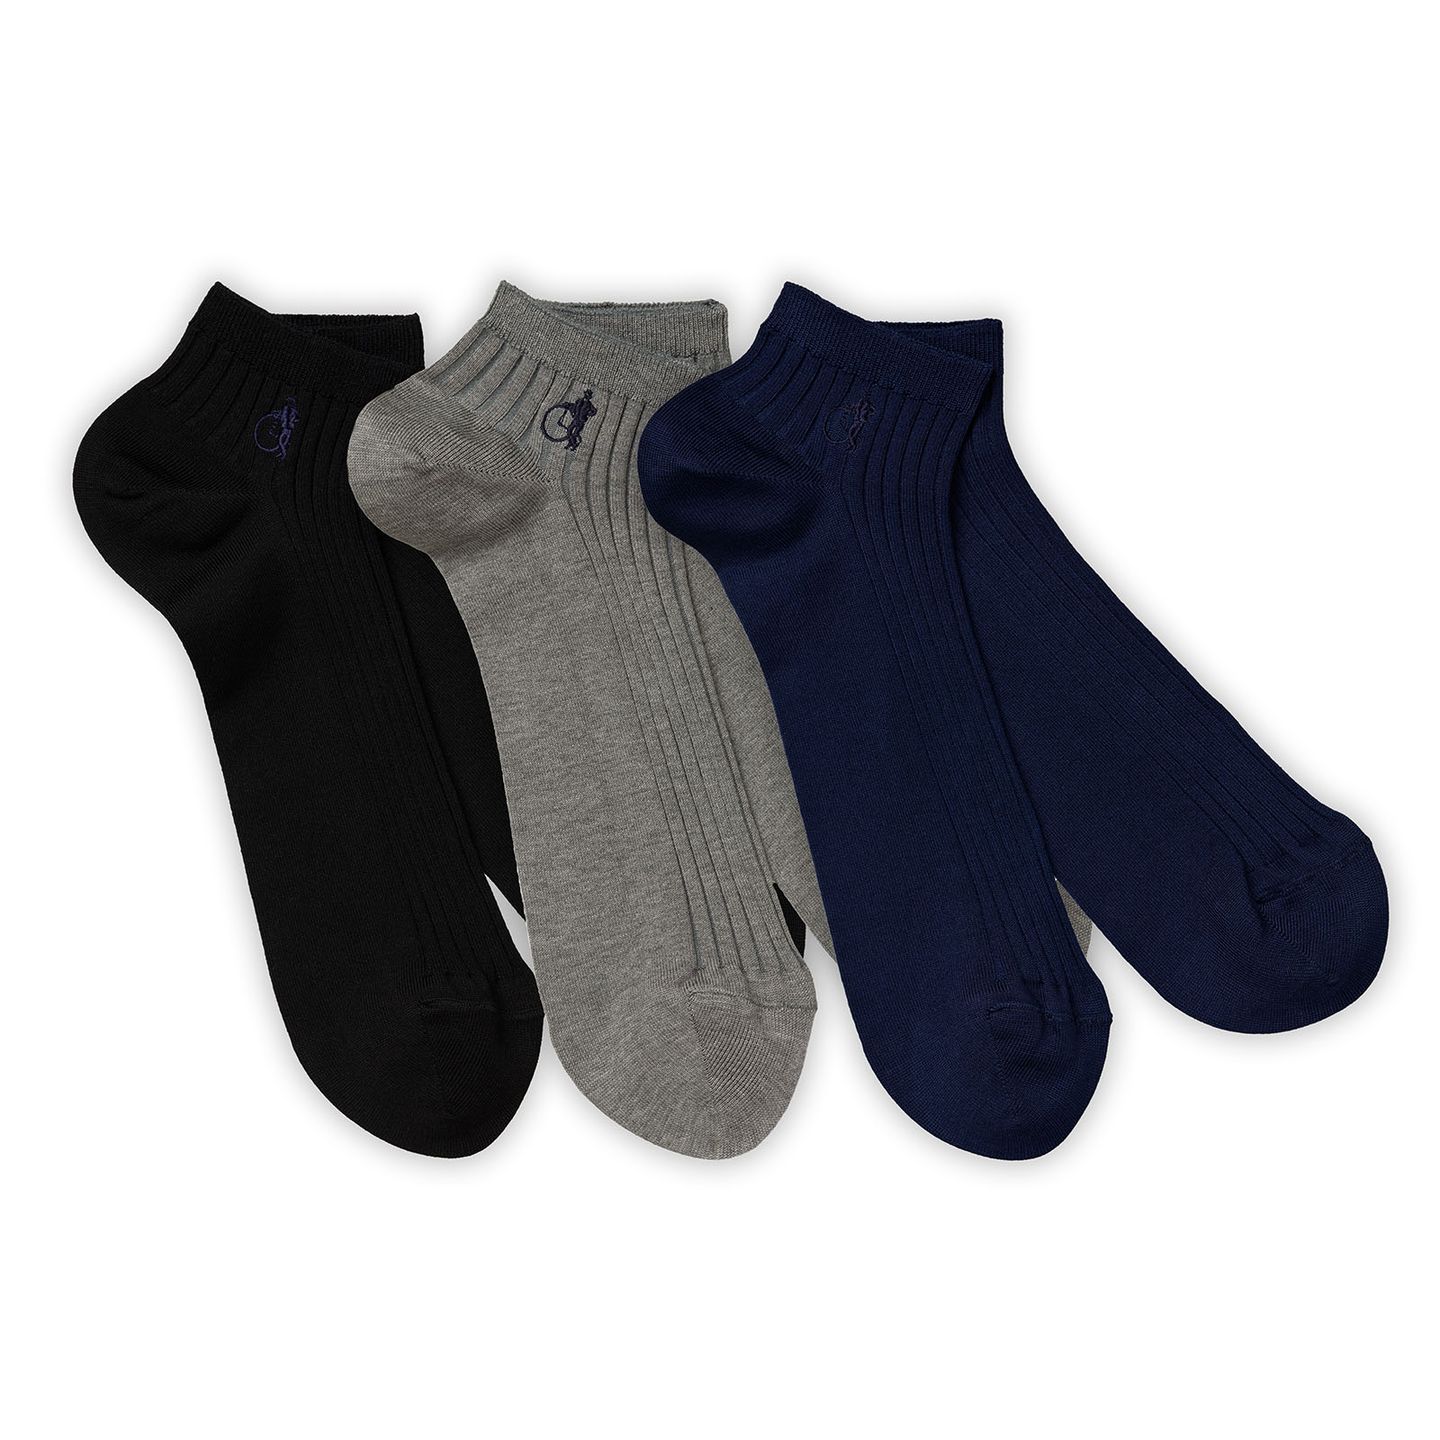 3 pairs of cotton trainer socks in black, grey and dark blue